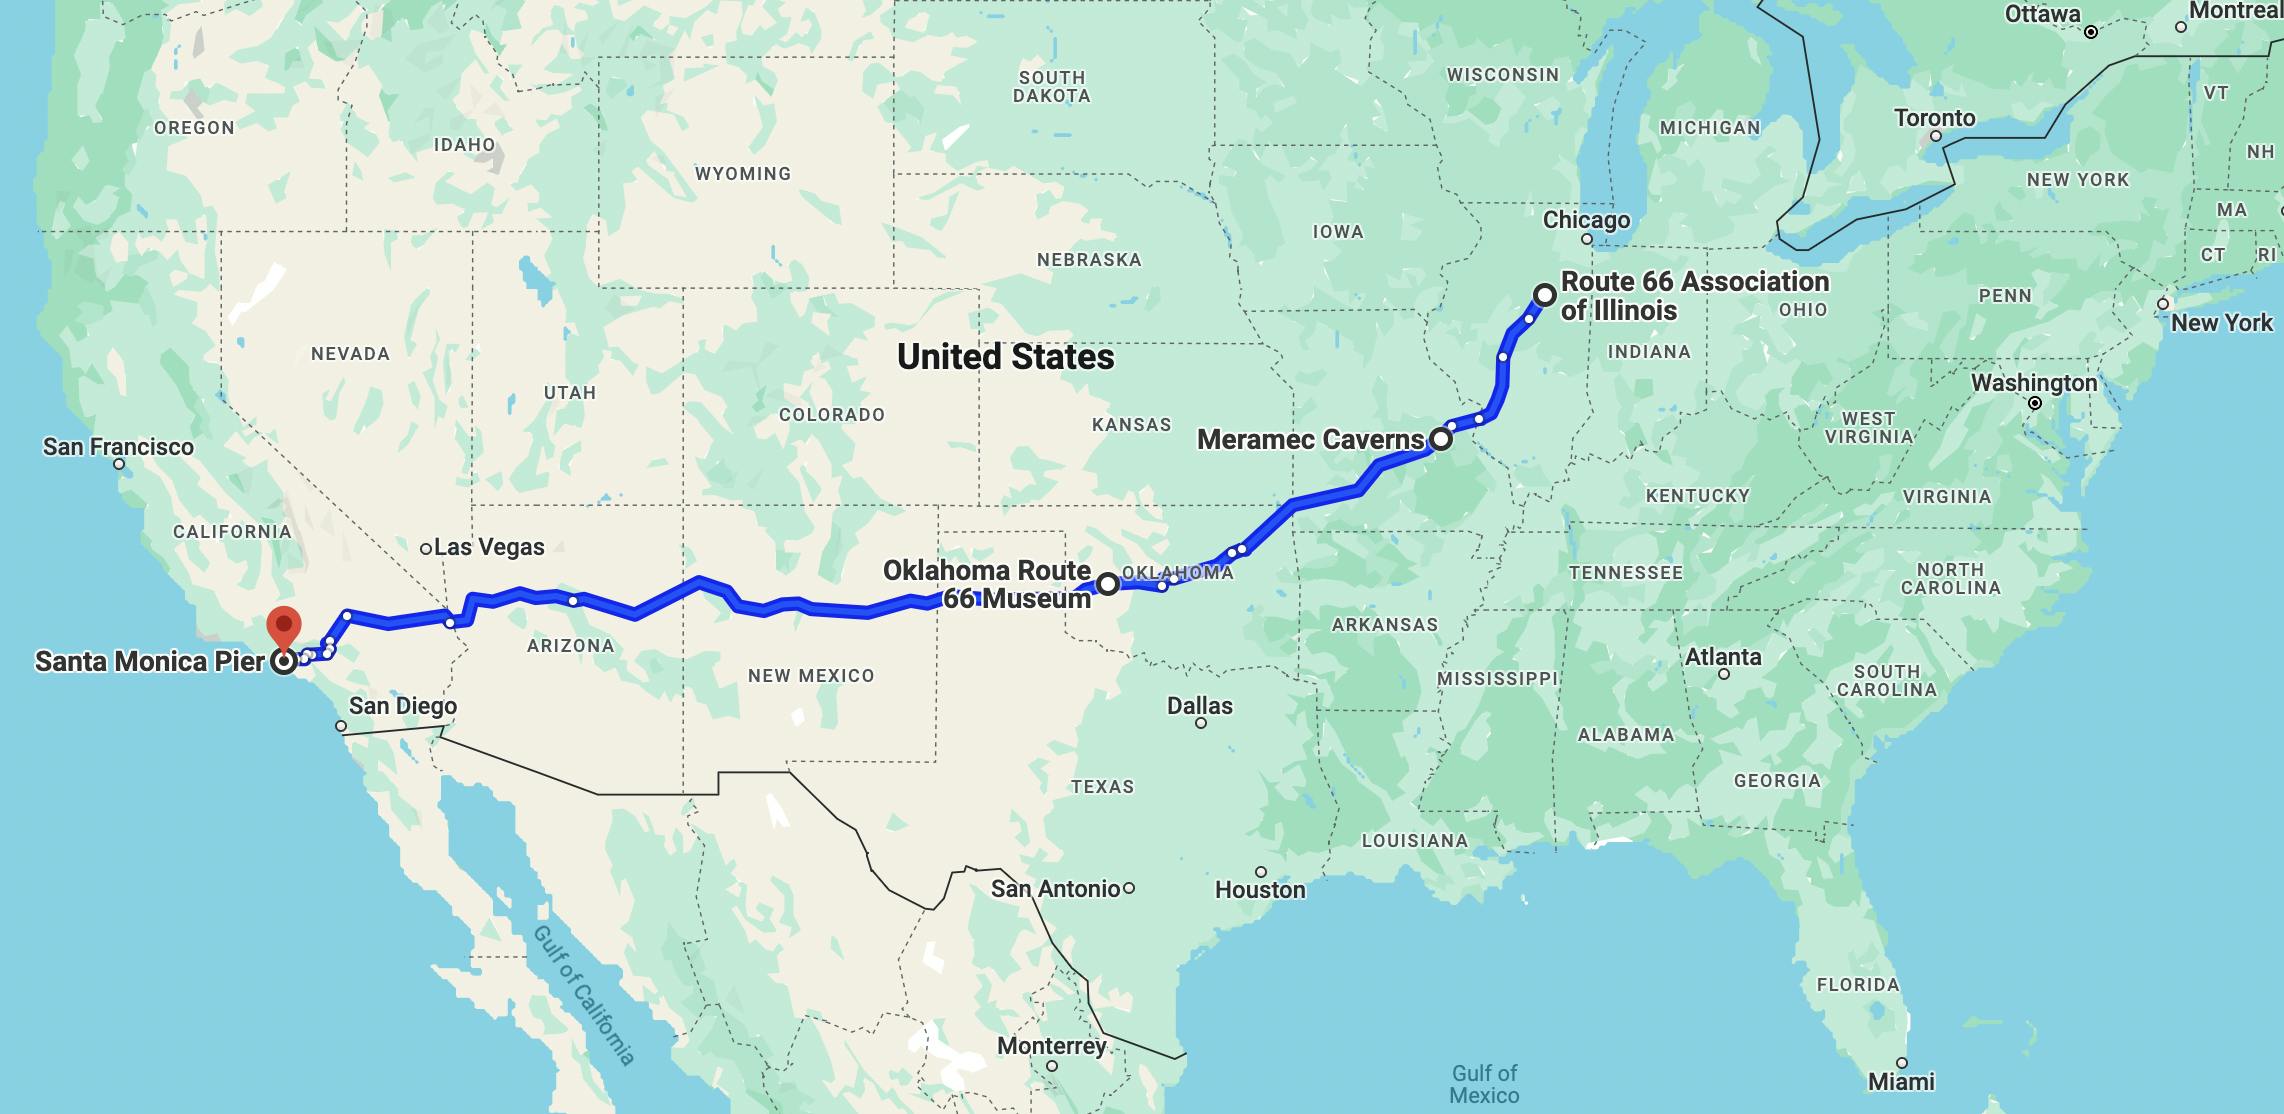 cross-country motorcycle road trip - route 66